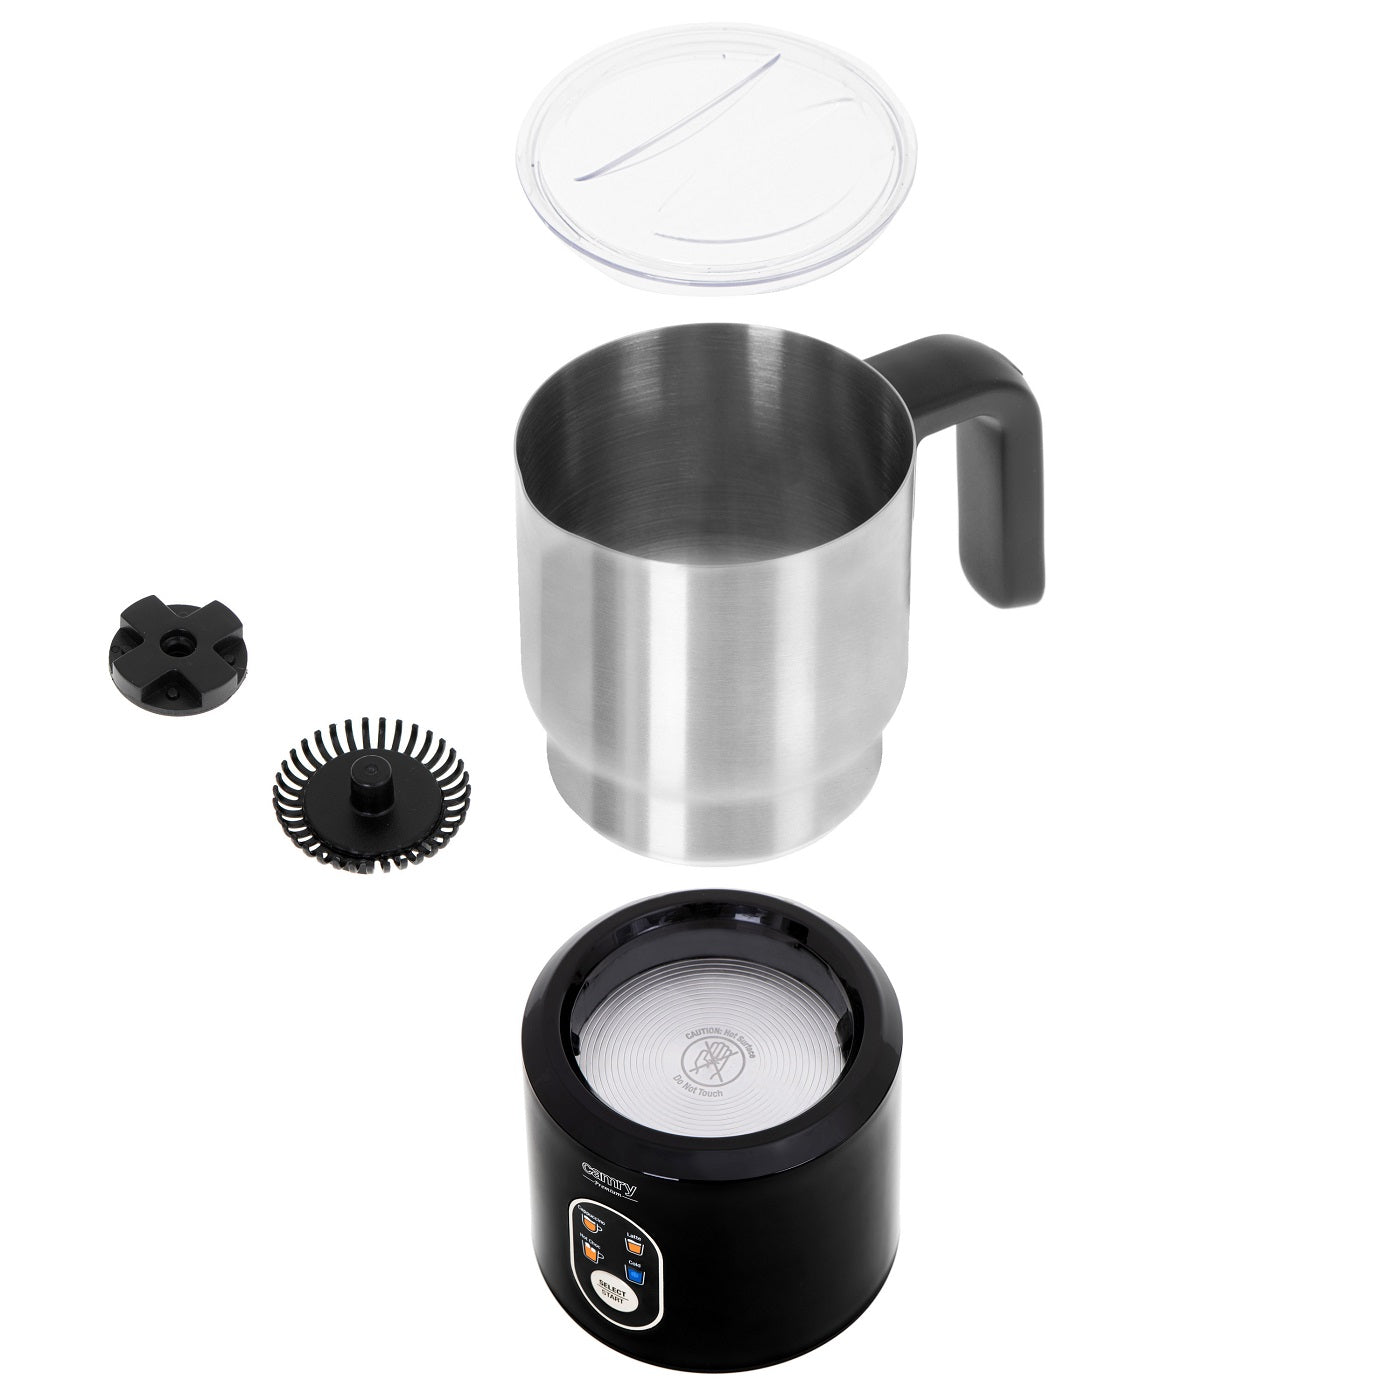 Camry CR4498 Milk Frother 2in1 Frothing and Heating